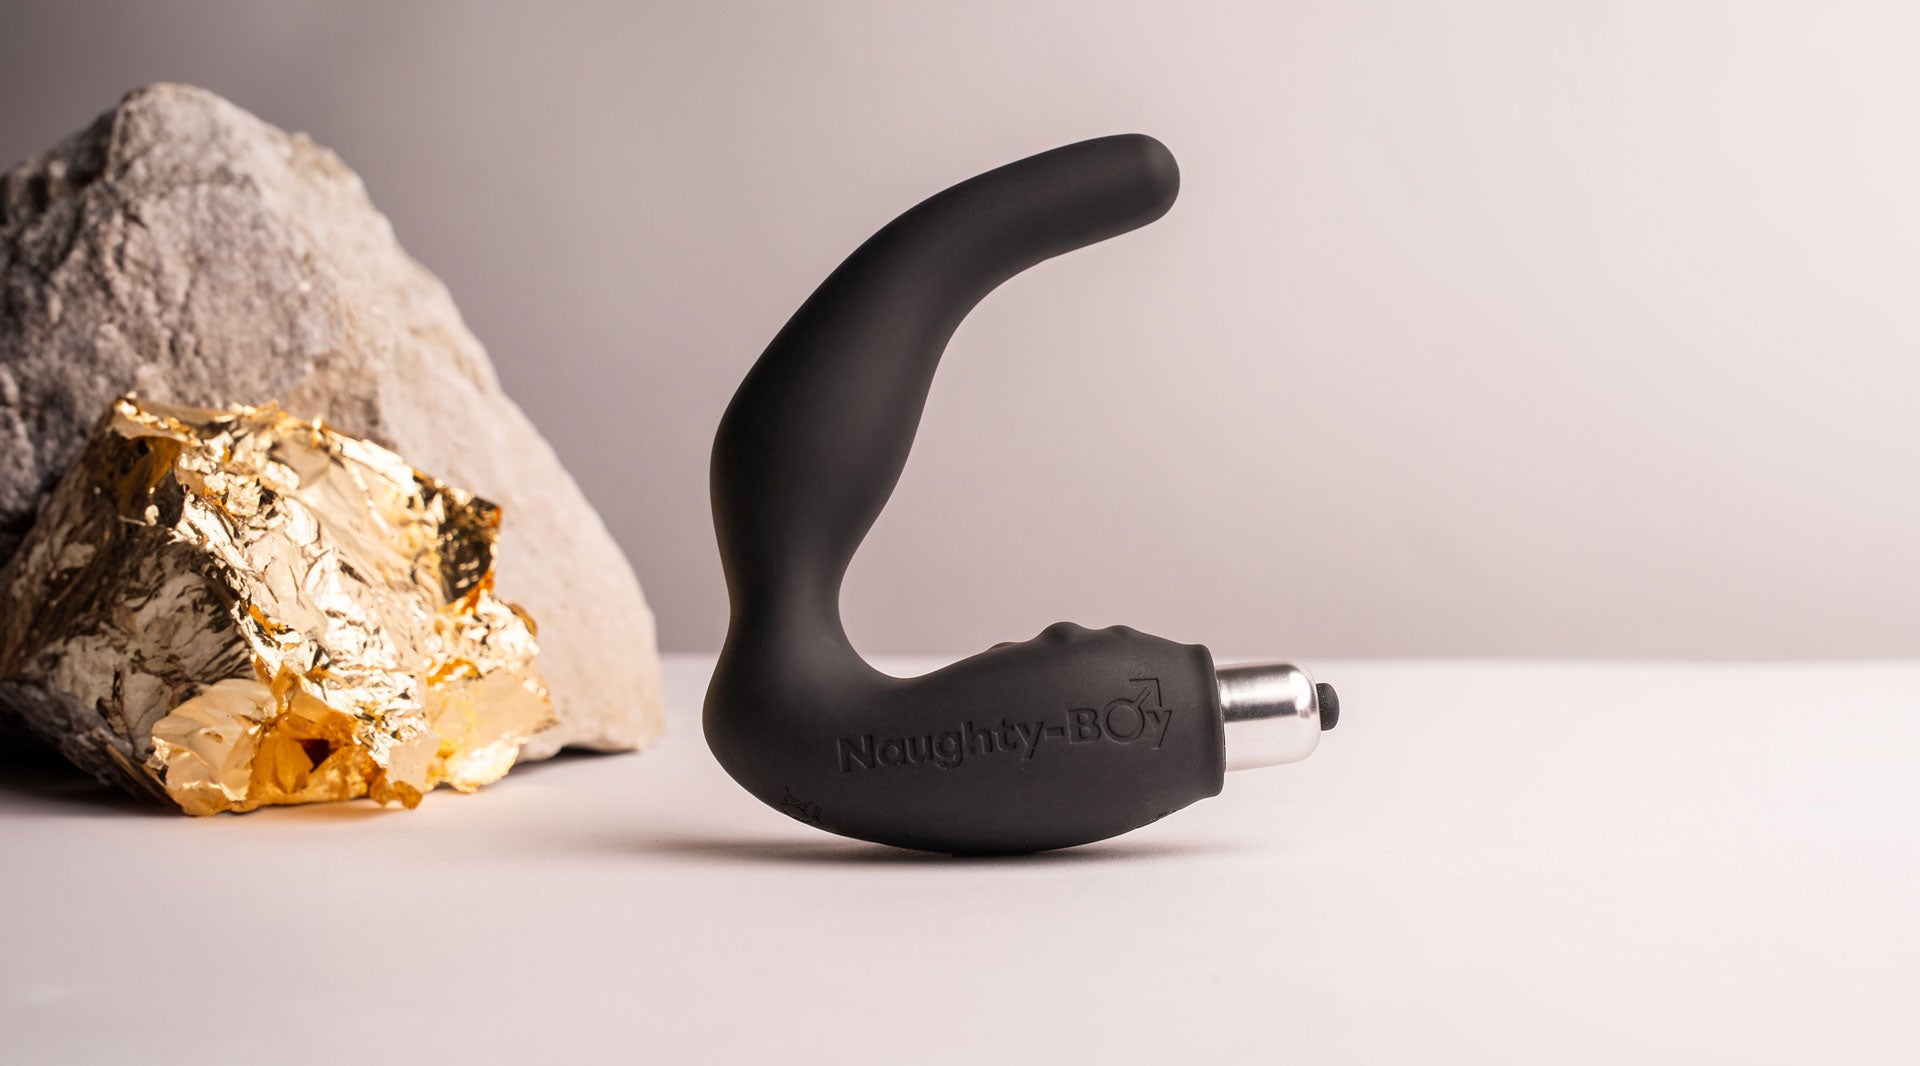 Silicone prostate massager with rippled perineum pleasure points housing a removable bullet vibrator in black.